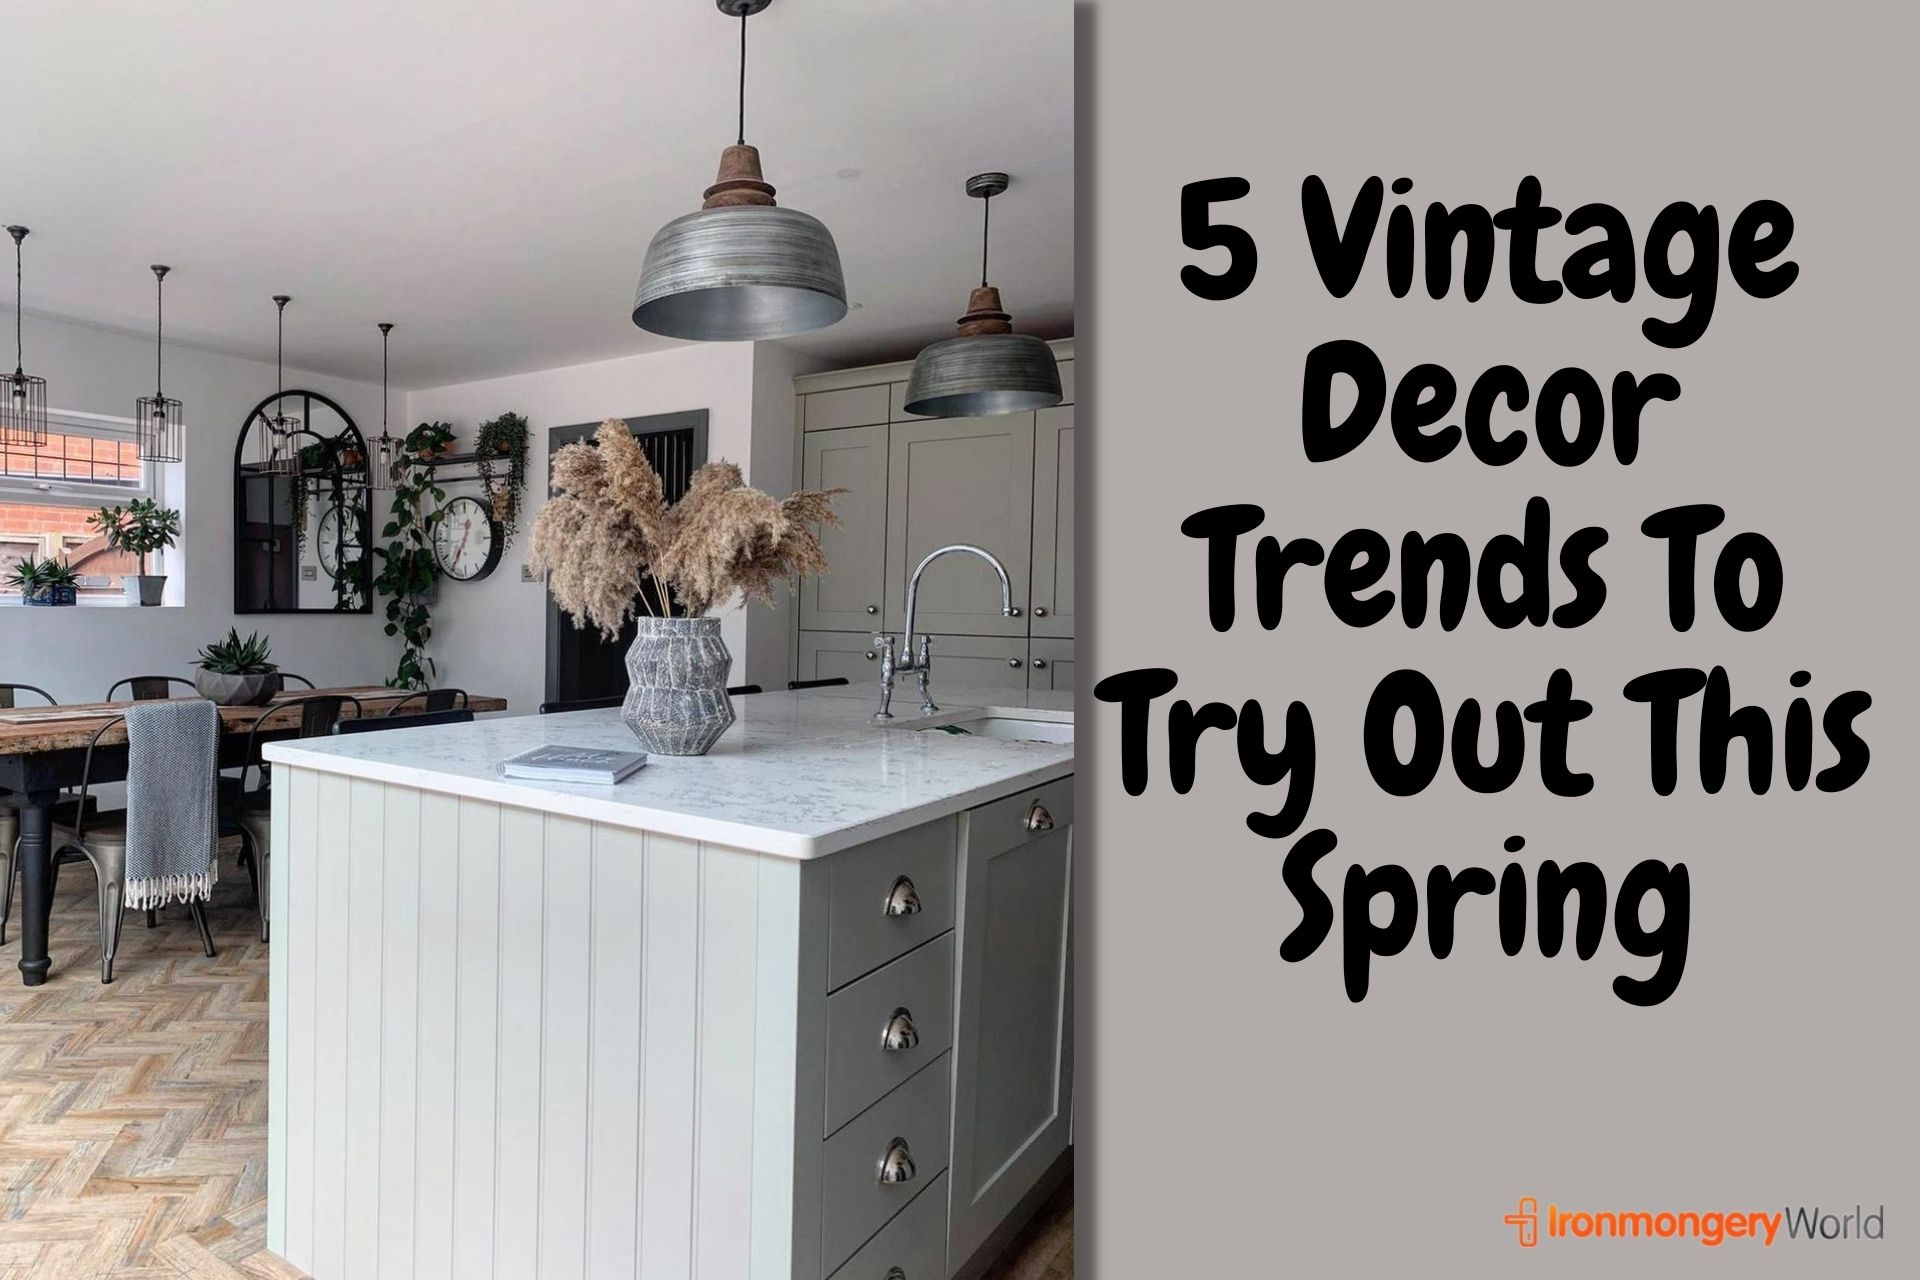 5 Vintage Decor Trends To Try Out This Spring